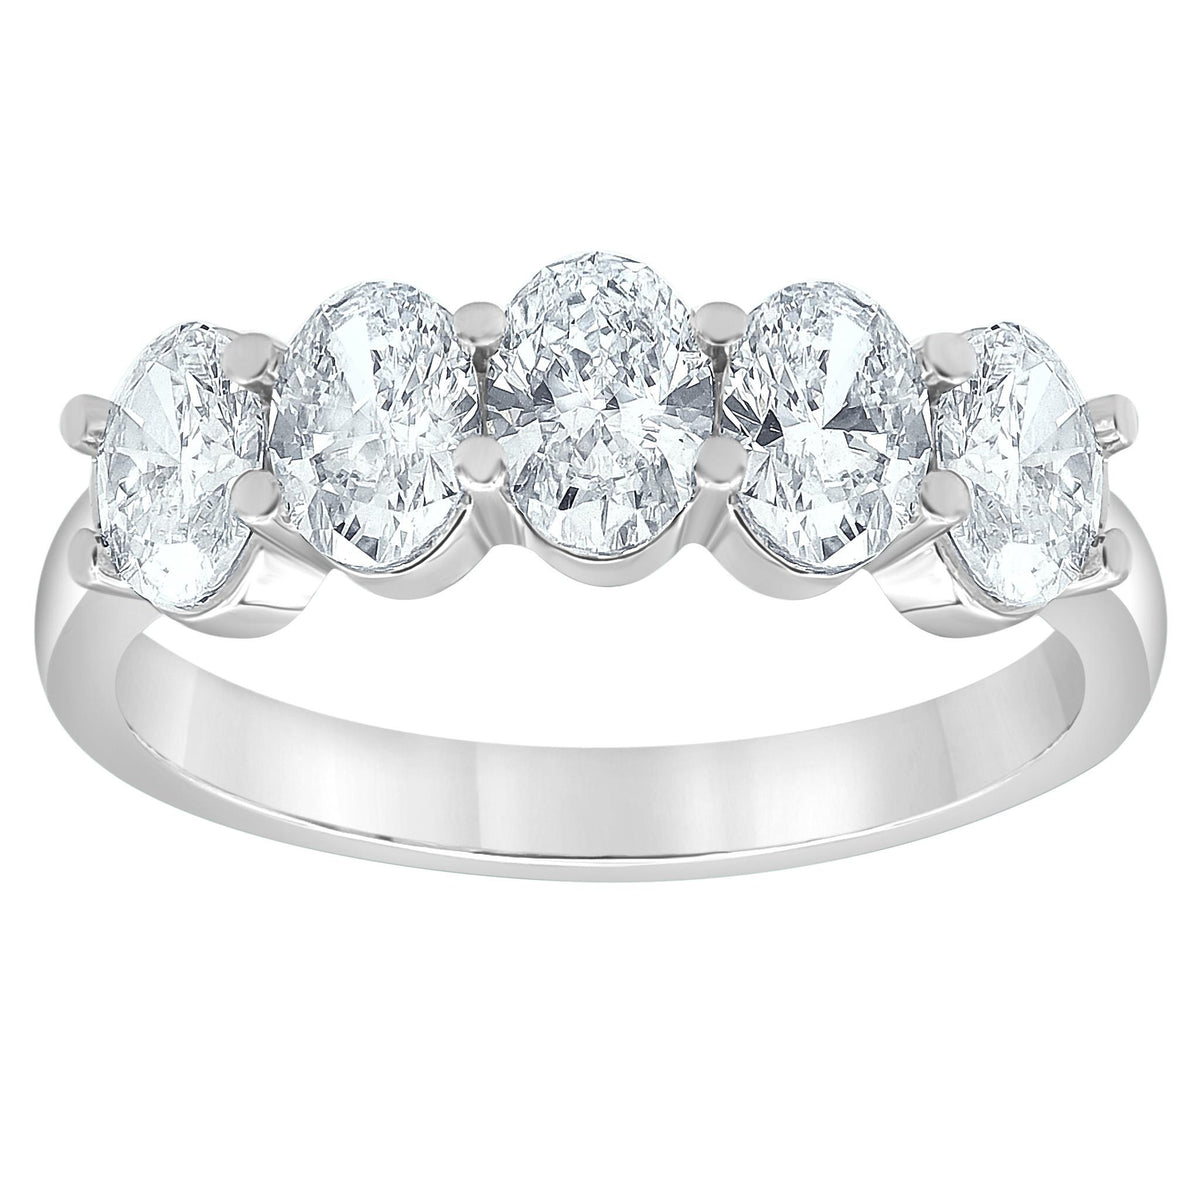 14Kt White Gold Prong Set Wedding Ring With 2.00cttw Lab-Grown Diamonds